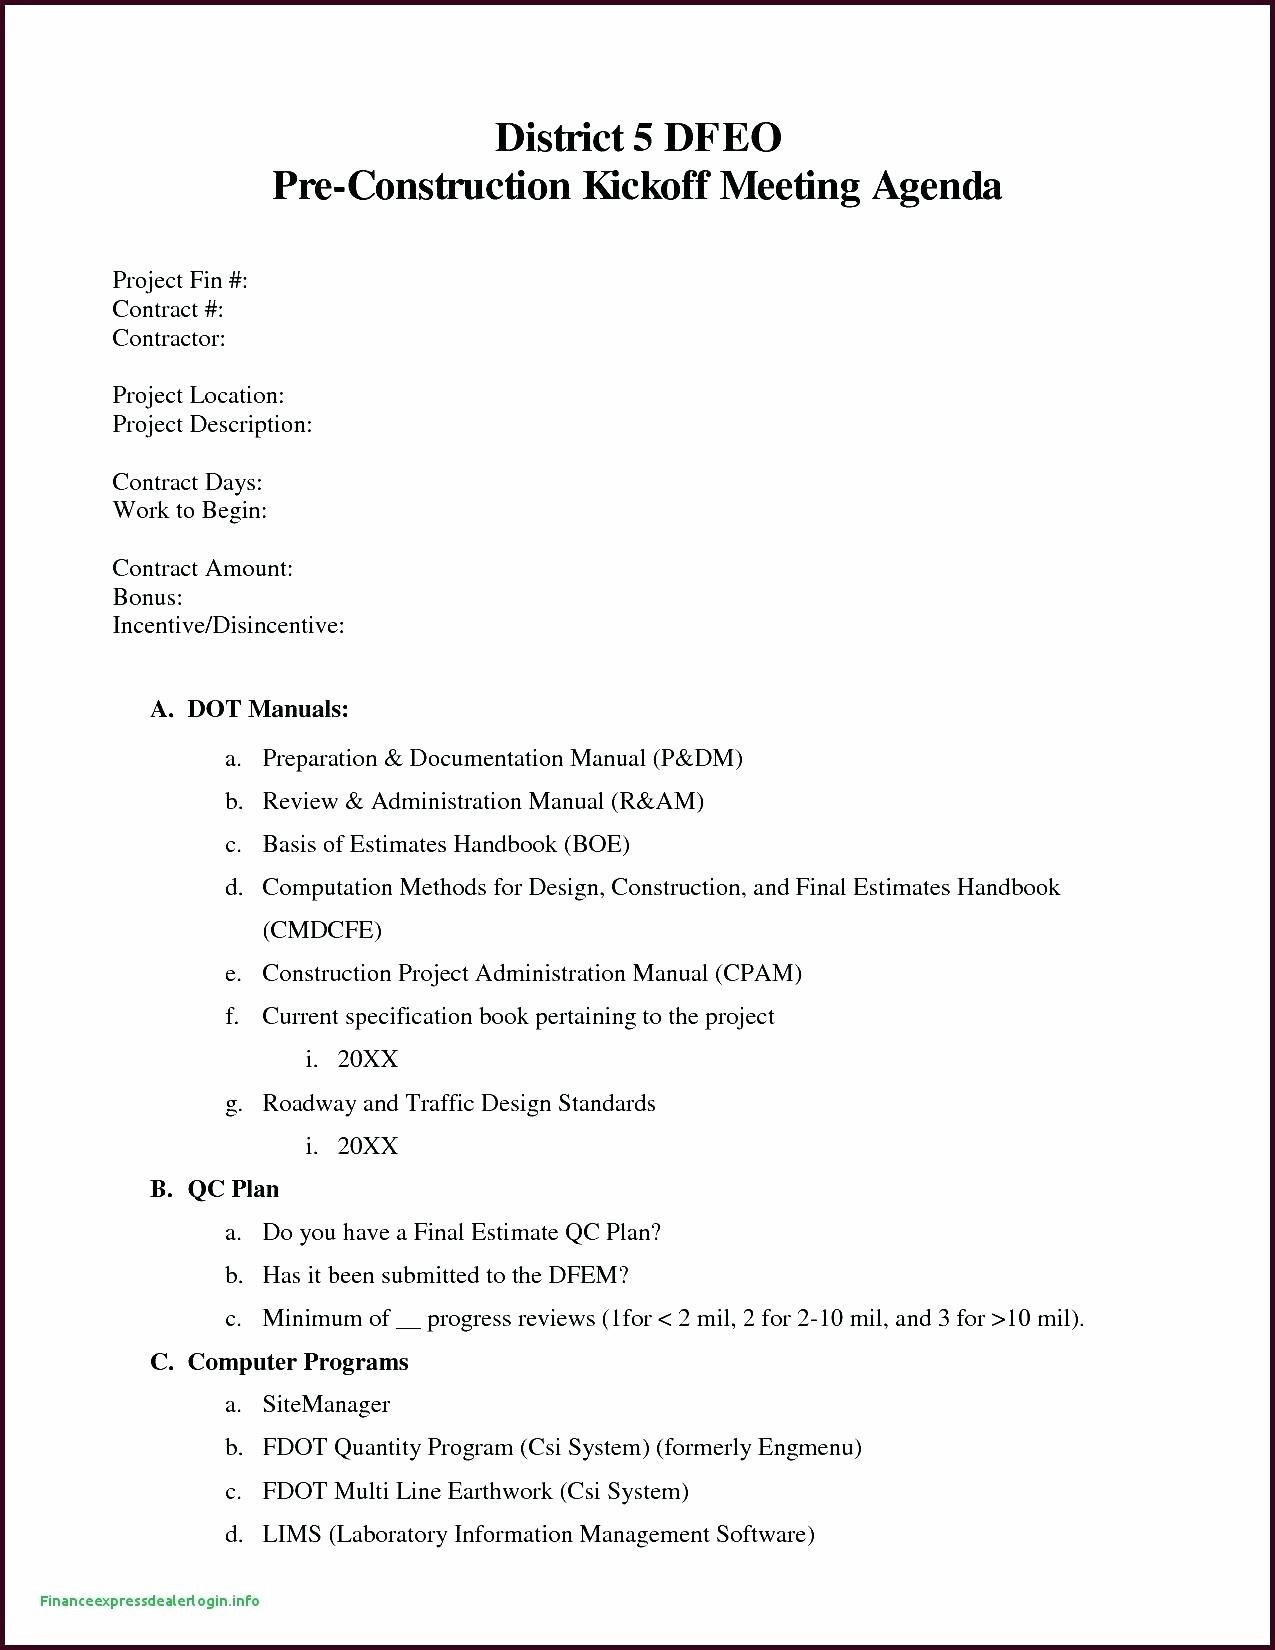 Project Kickoff Meeting Agenda Template The Complete Guide To within Committee Meeting Agenda Template